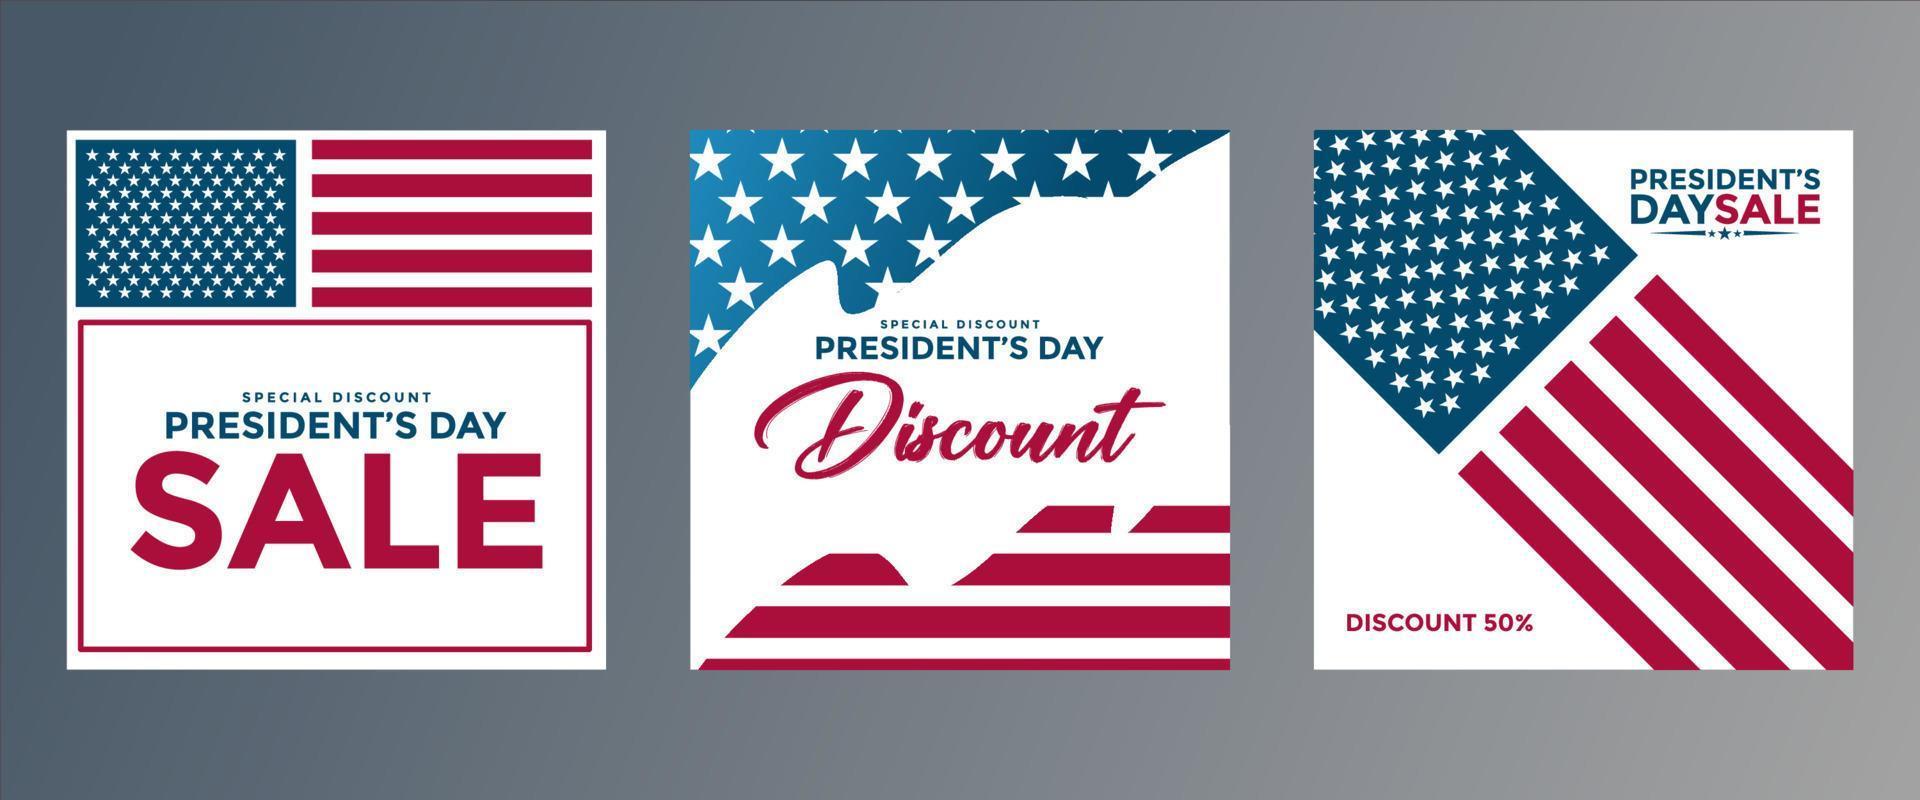 United States President's Day Sale special offer promotional backgrounds set for business, advertising and holiday shopping. Presidents day sales events cards. Vector illustration.